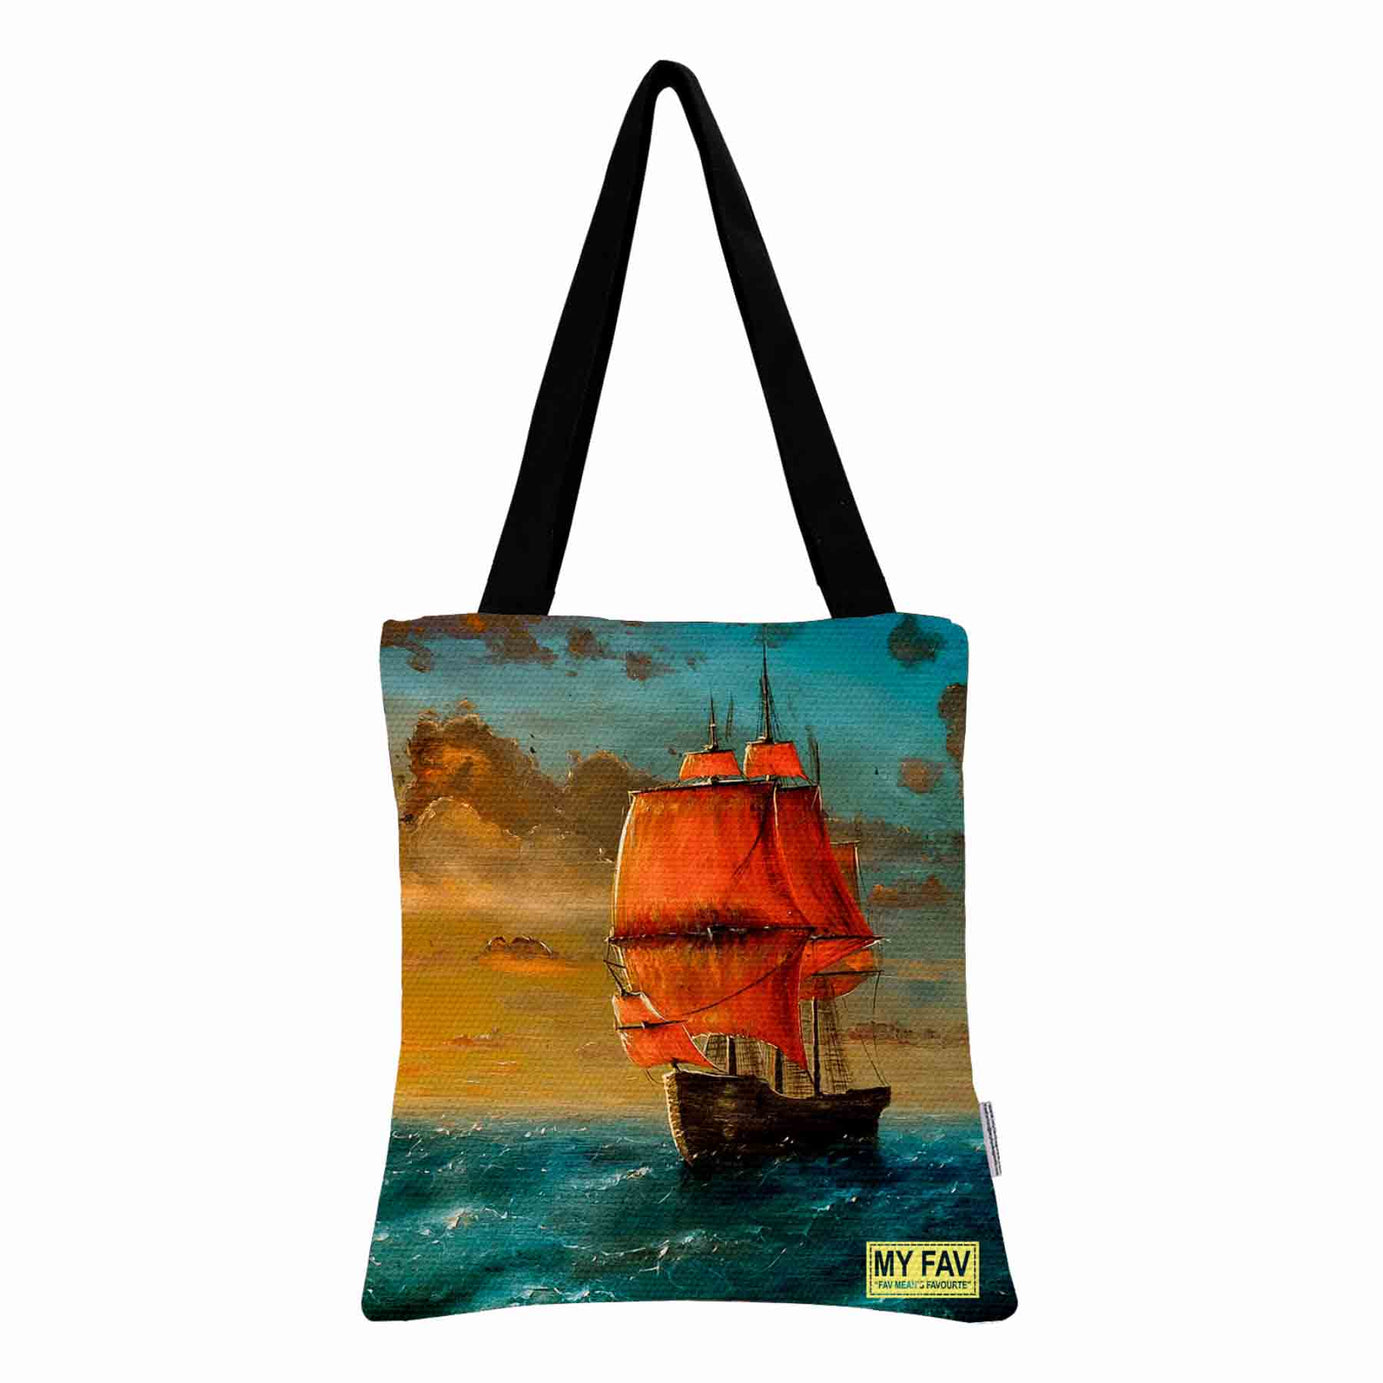 My Fav Ship in the Sea Printed Cotton Canvas Tote Bag